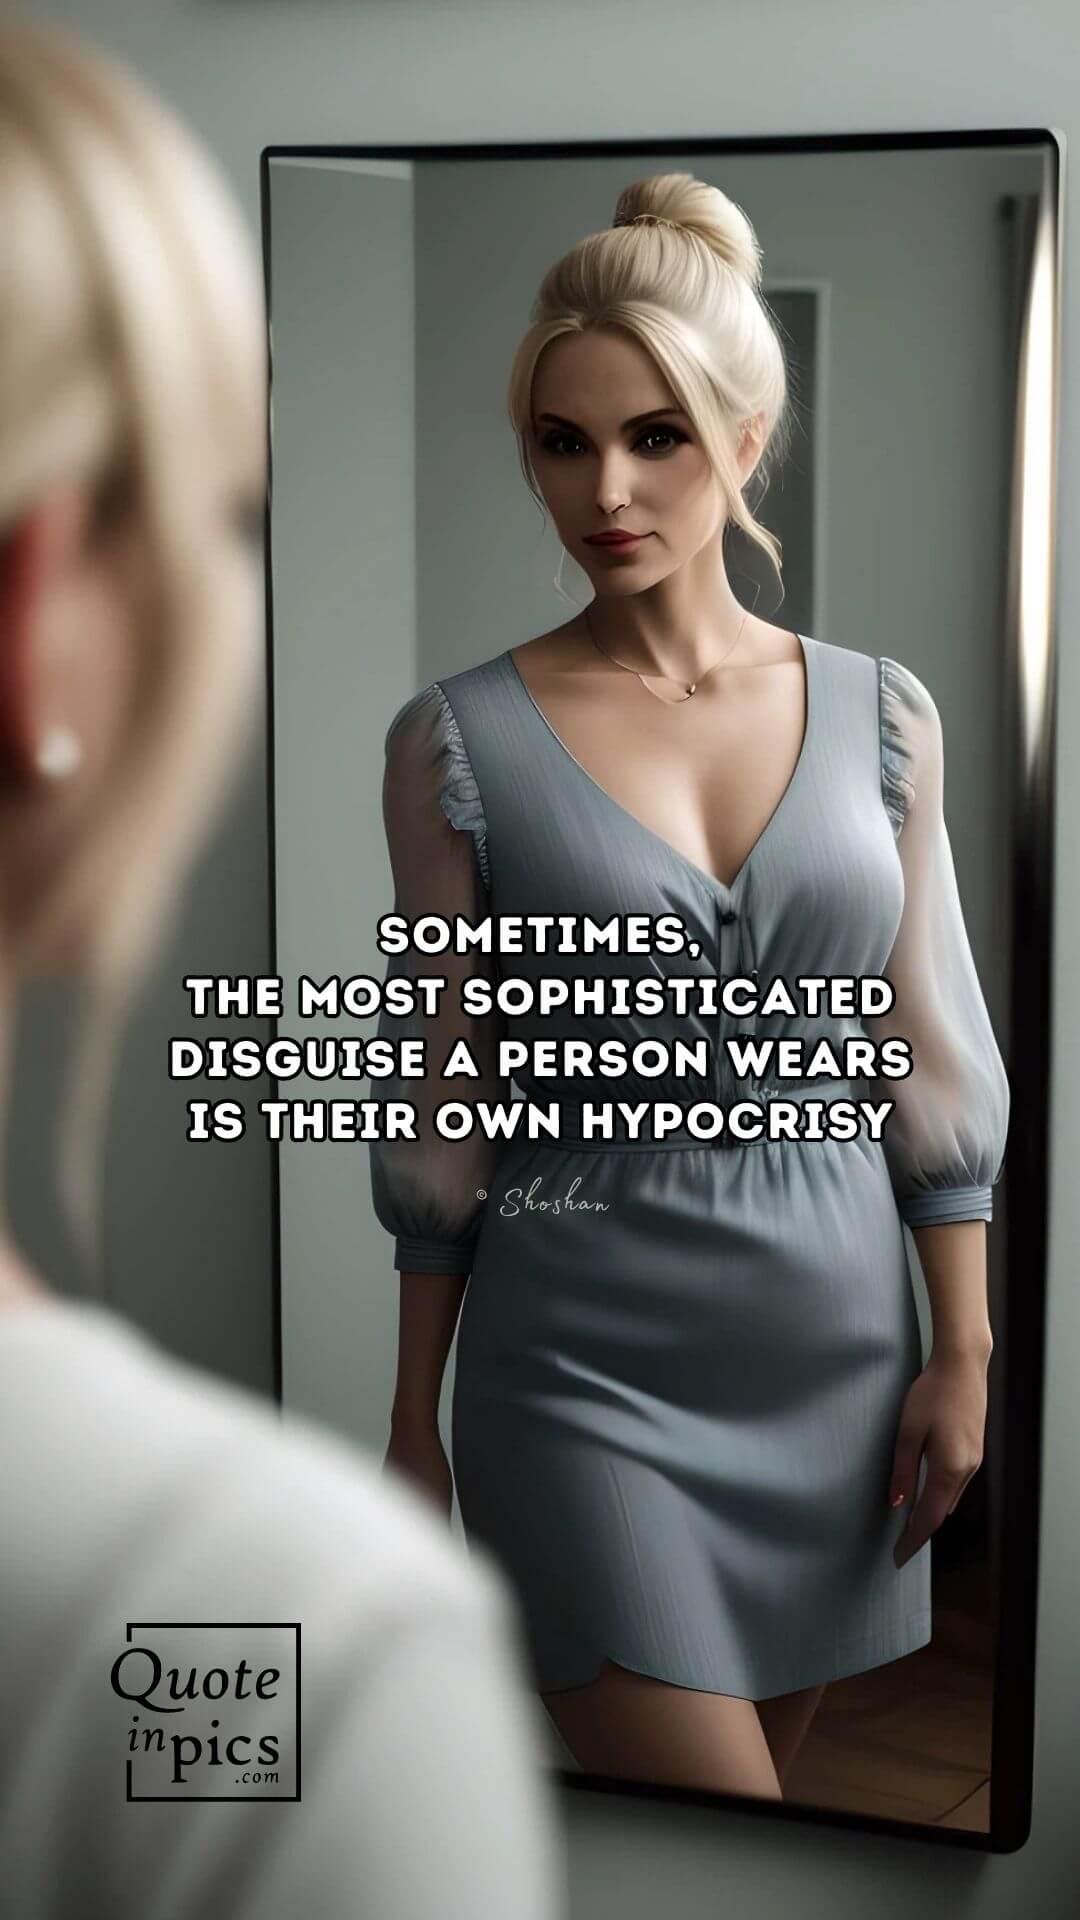 Sometimes, the most sophisticated disguise a person wears is their own hypocrisy - Shoshan